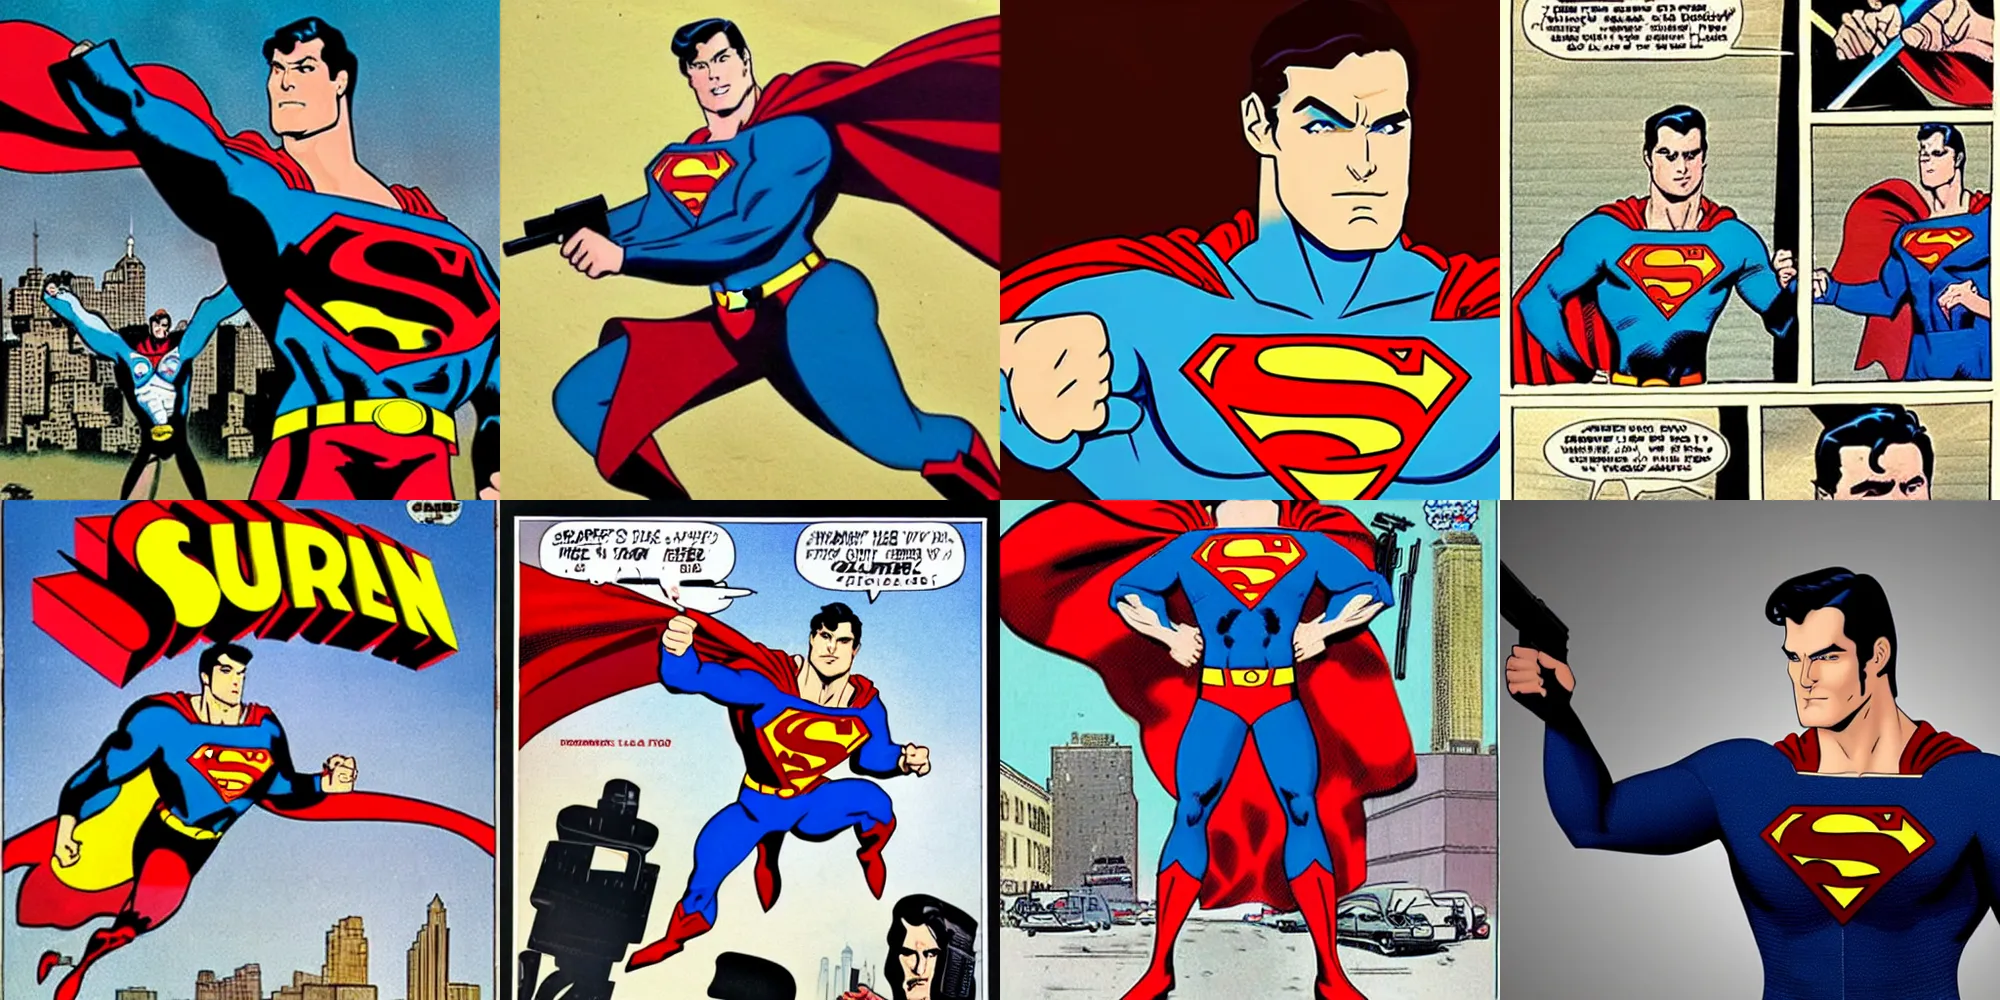 Prompt: Superman shows how cool he looks holding guns